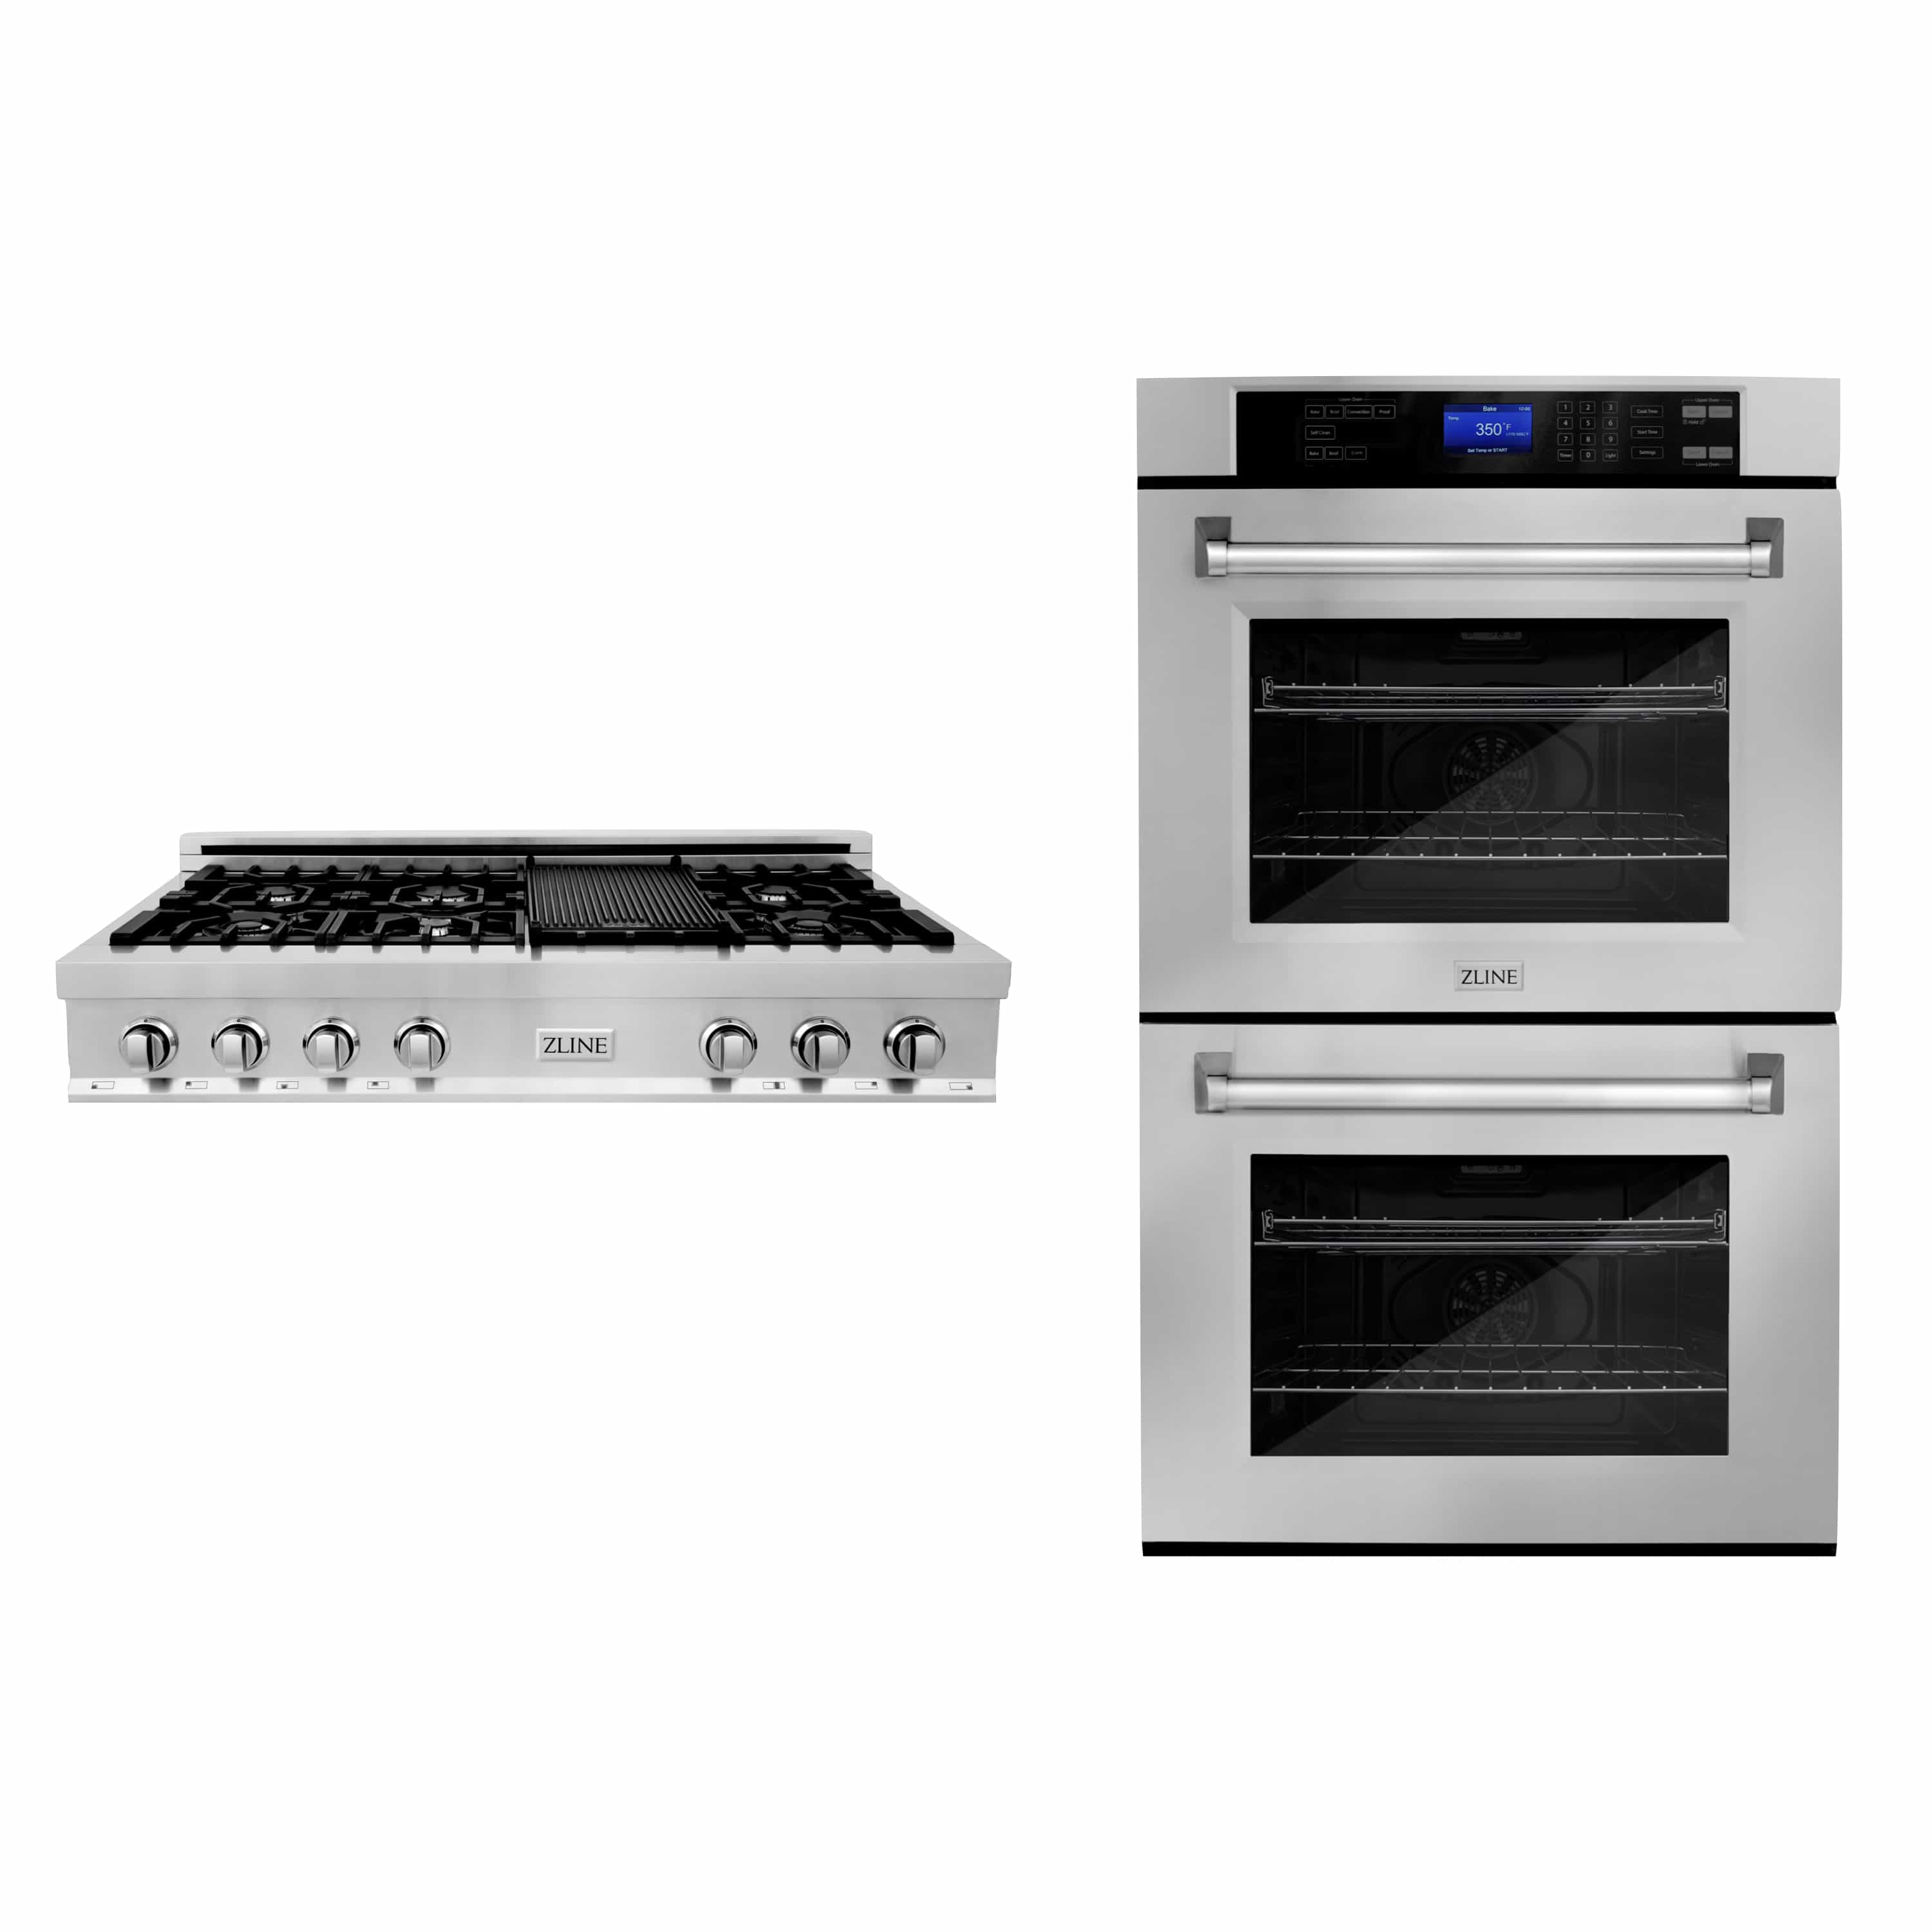 ZLINE 2-Piece Appliance Package - 48-inch Rangetop & 30-inch Double Wall Oven in Stainless Steel (2KP-RTAWD48)